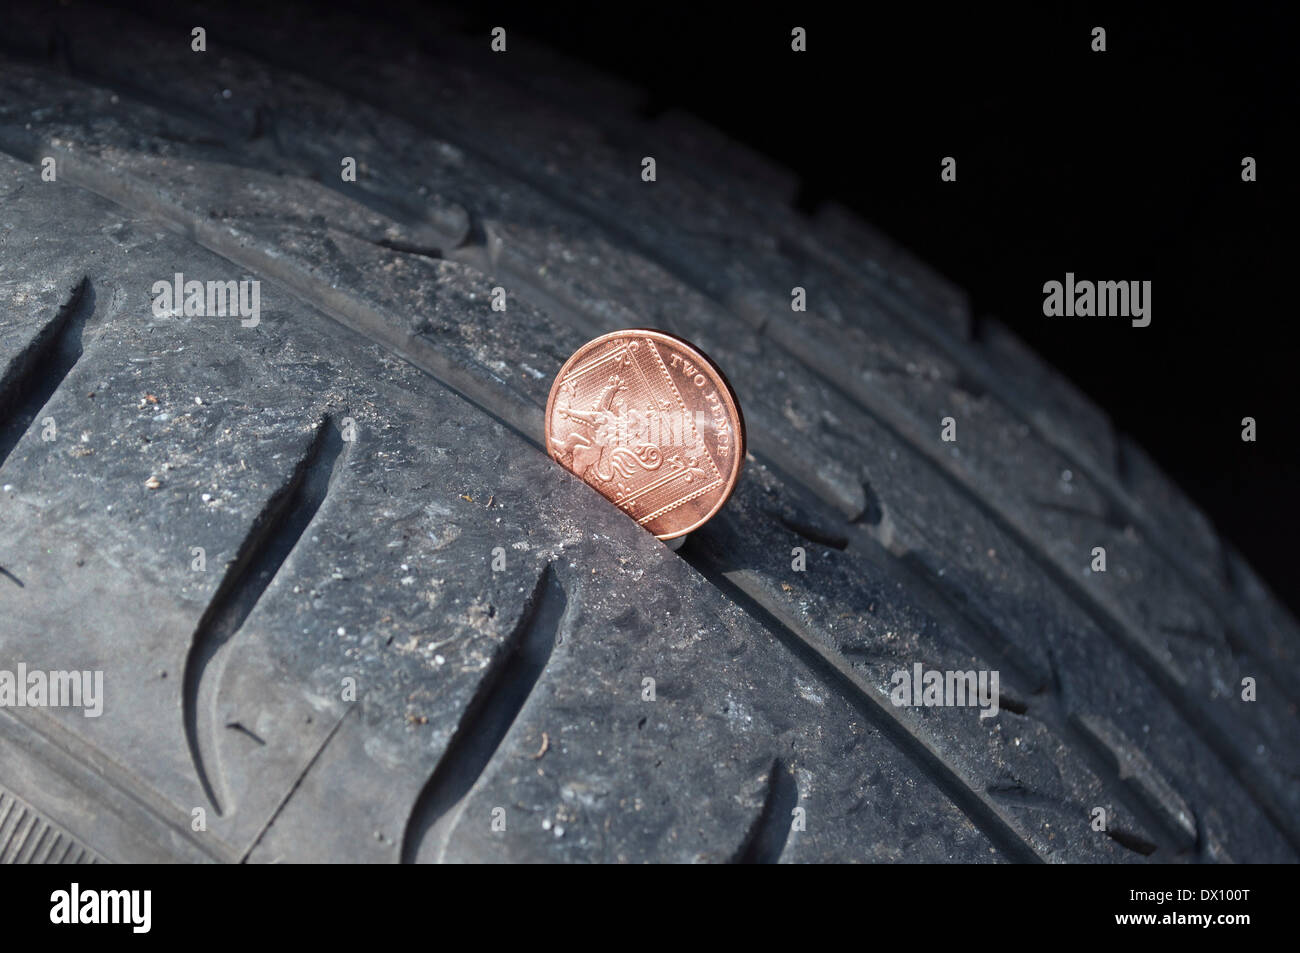 checking the tread depth on a car tyre using a coin Stock Photo